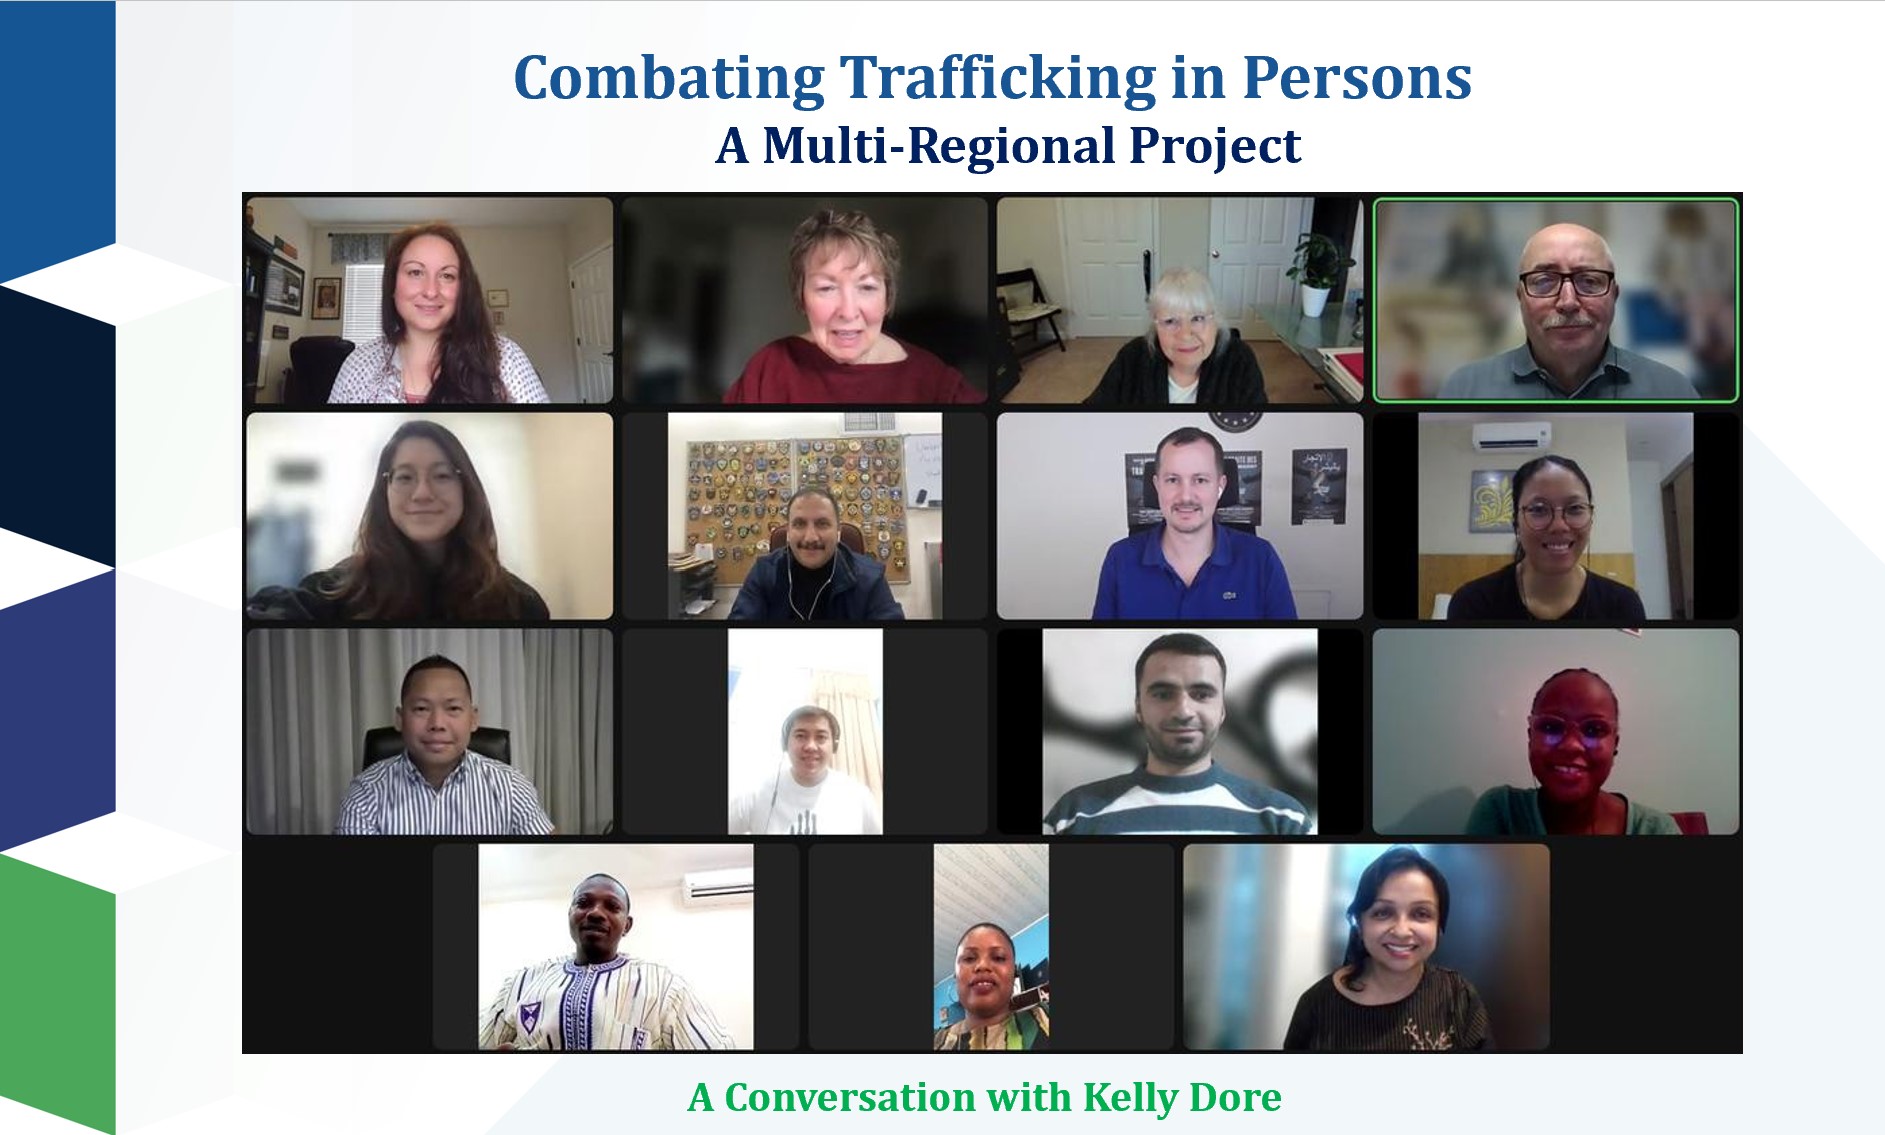 A Combatting Trafficking in Persons virtual meeting with Kelly Dore, Executive Director of the Sierra Cares Foundation. This foundation serves to repatriate, educate, and serve vulnerable women and children in the Makeni region of Sierra Leone! This multi-regional project brought visitors from 29 different countries virtually to Colorado Springs.